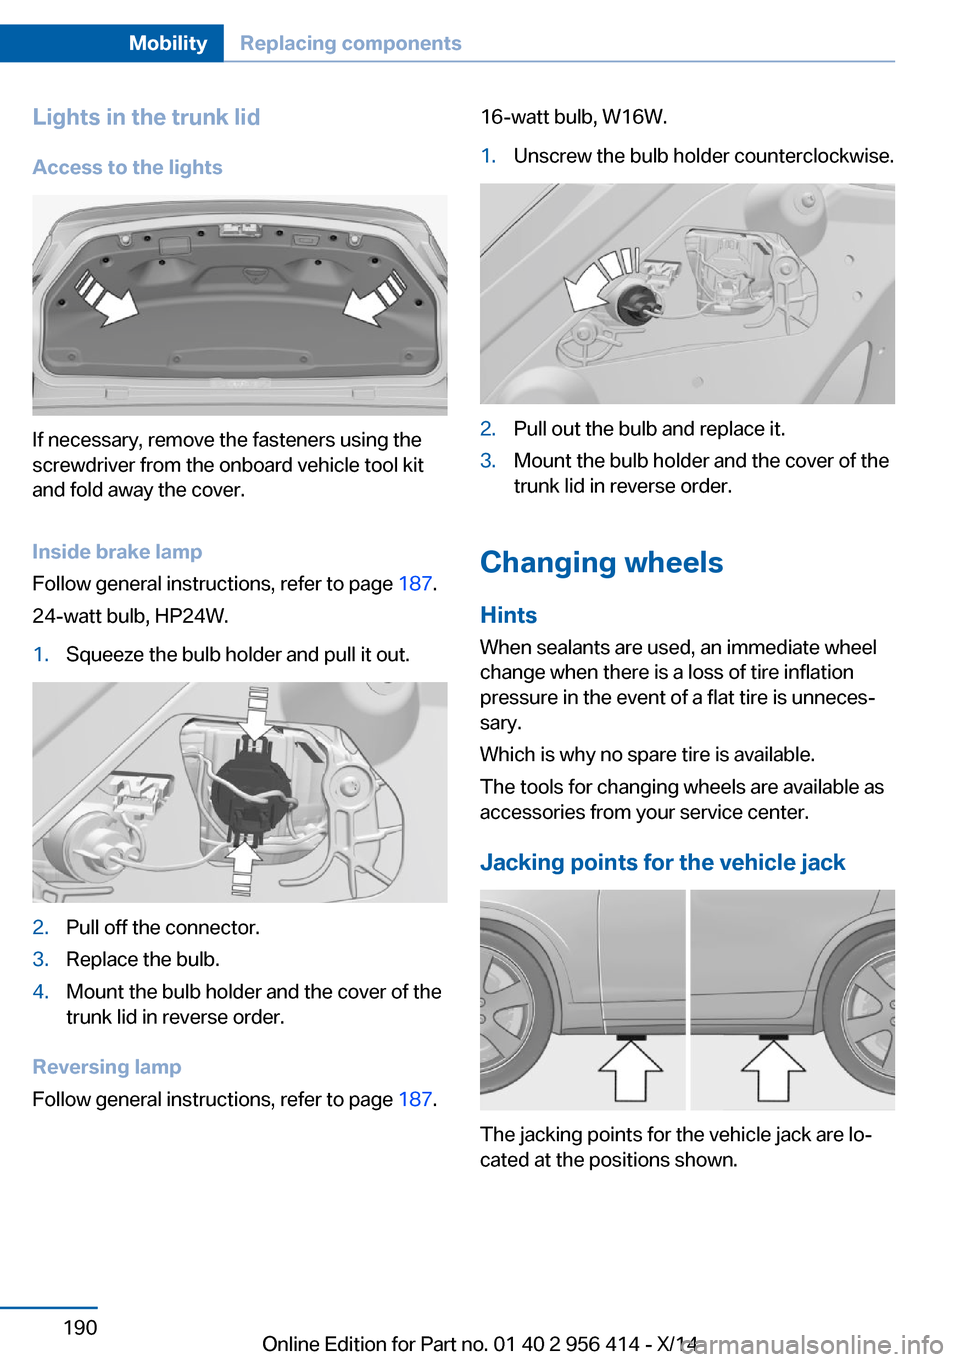 BMW M6 COUPE 2014 F13M Owners Manual Lights in the trunk lidAccess to the lights
If necessary, remove the fasteners using the
screwdriver from the onboard vehicle tool kit
and fold away the cover.
Inside brake lamp
Follow general instruc